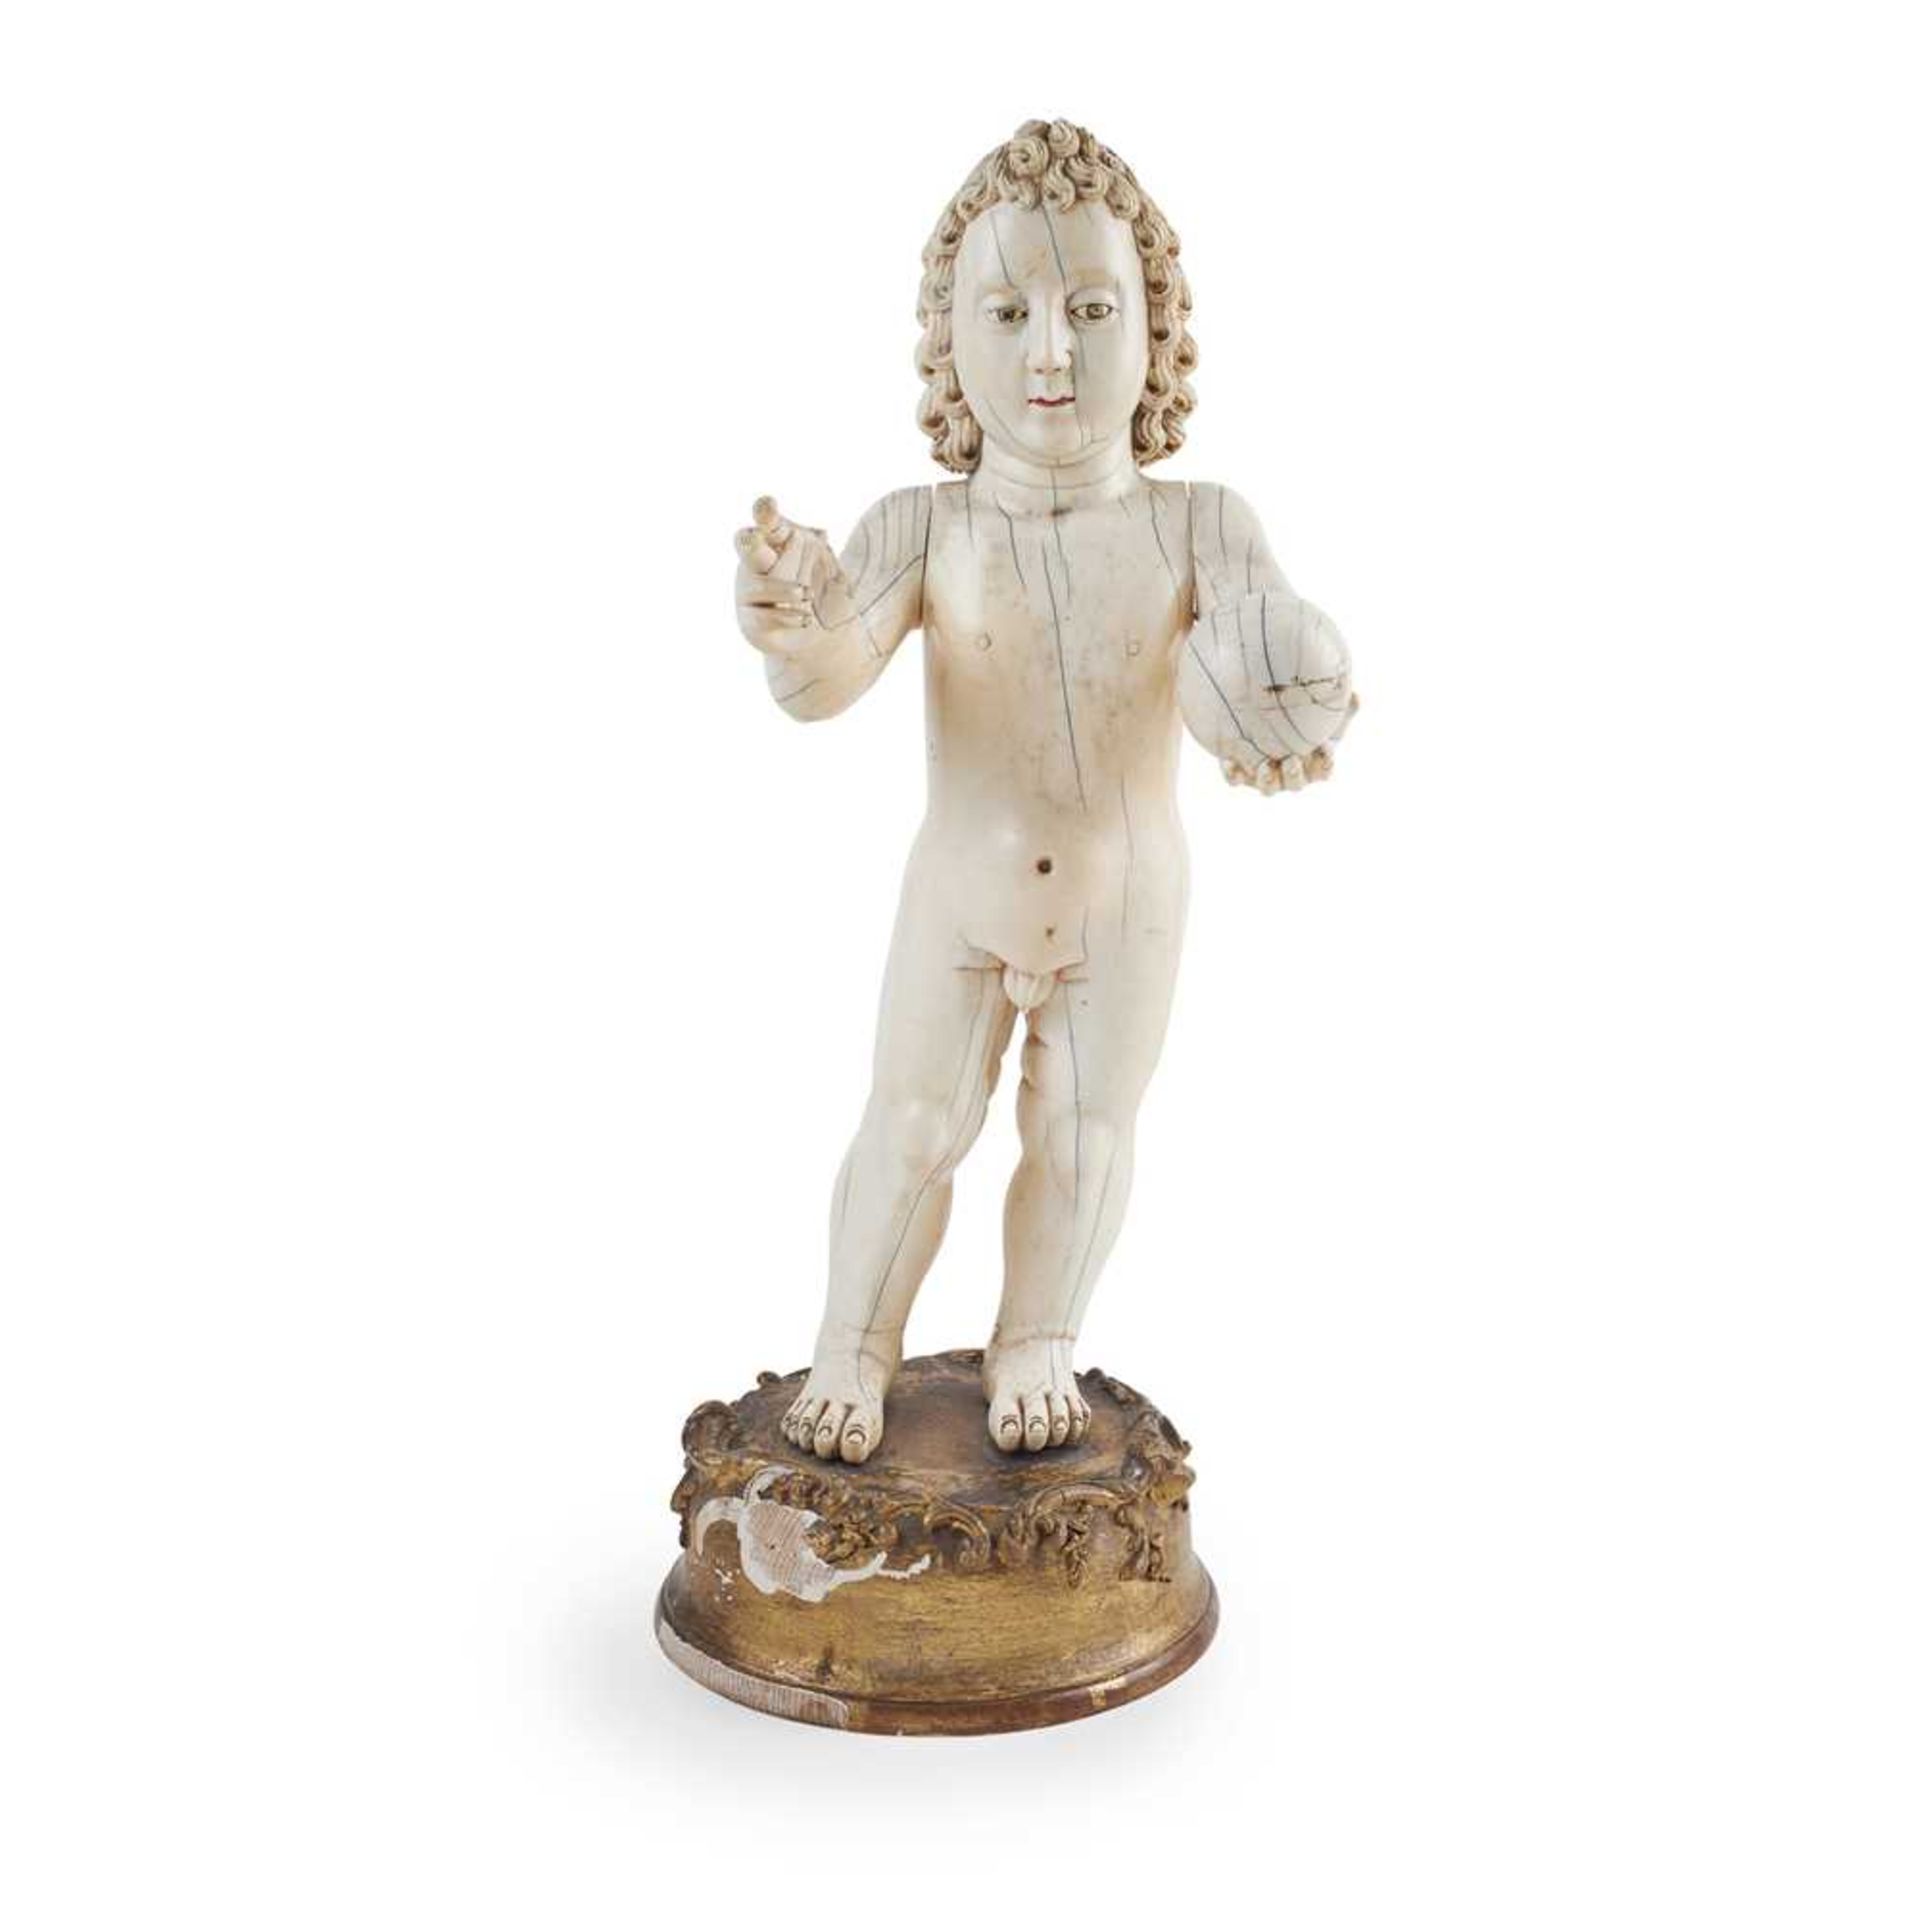 LARGE INDO-PORTUGUESE CARVED IVORY FIGURE OF THE INFANT CHRIST AS SALVATOR MUNDI, THE SAVIOUR OF THE